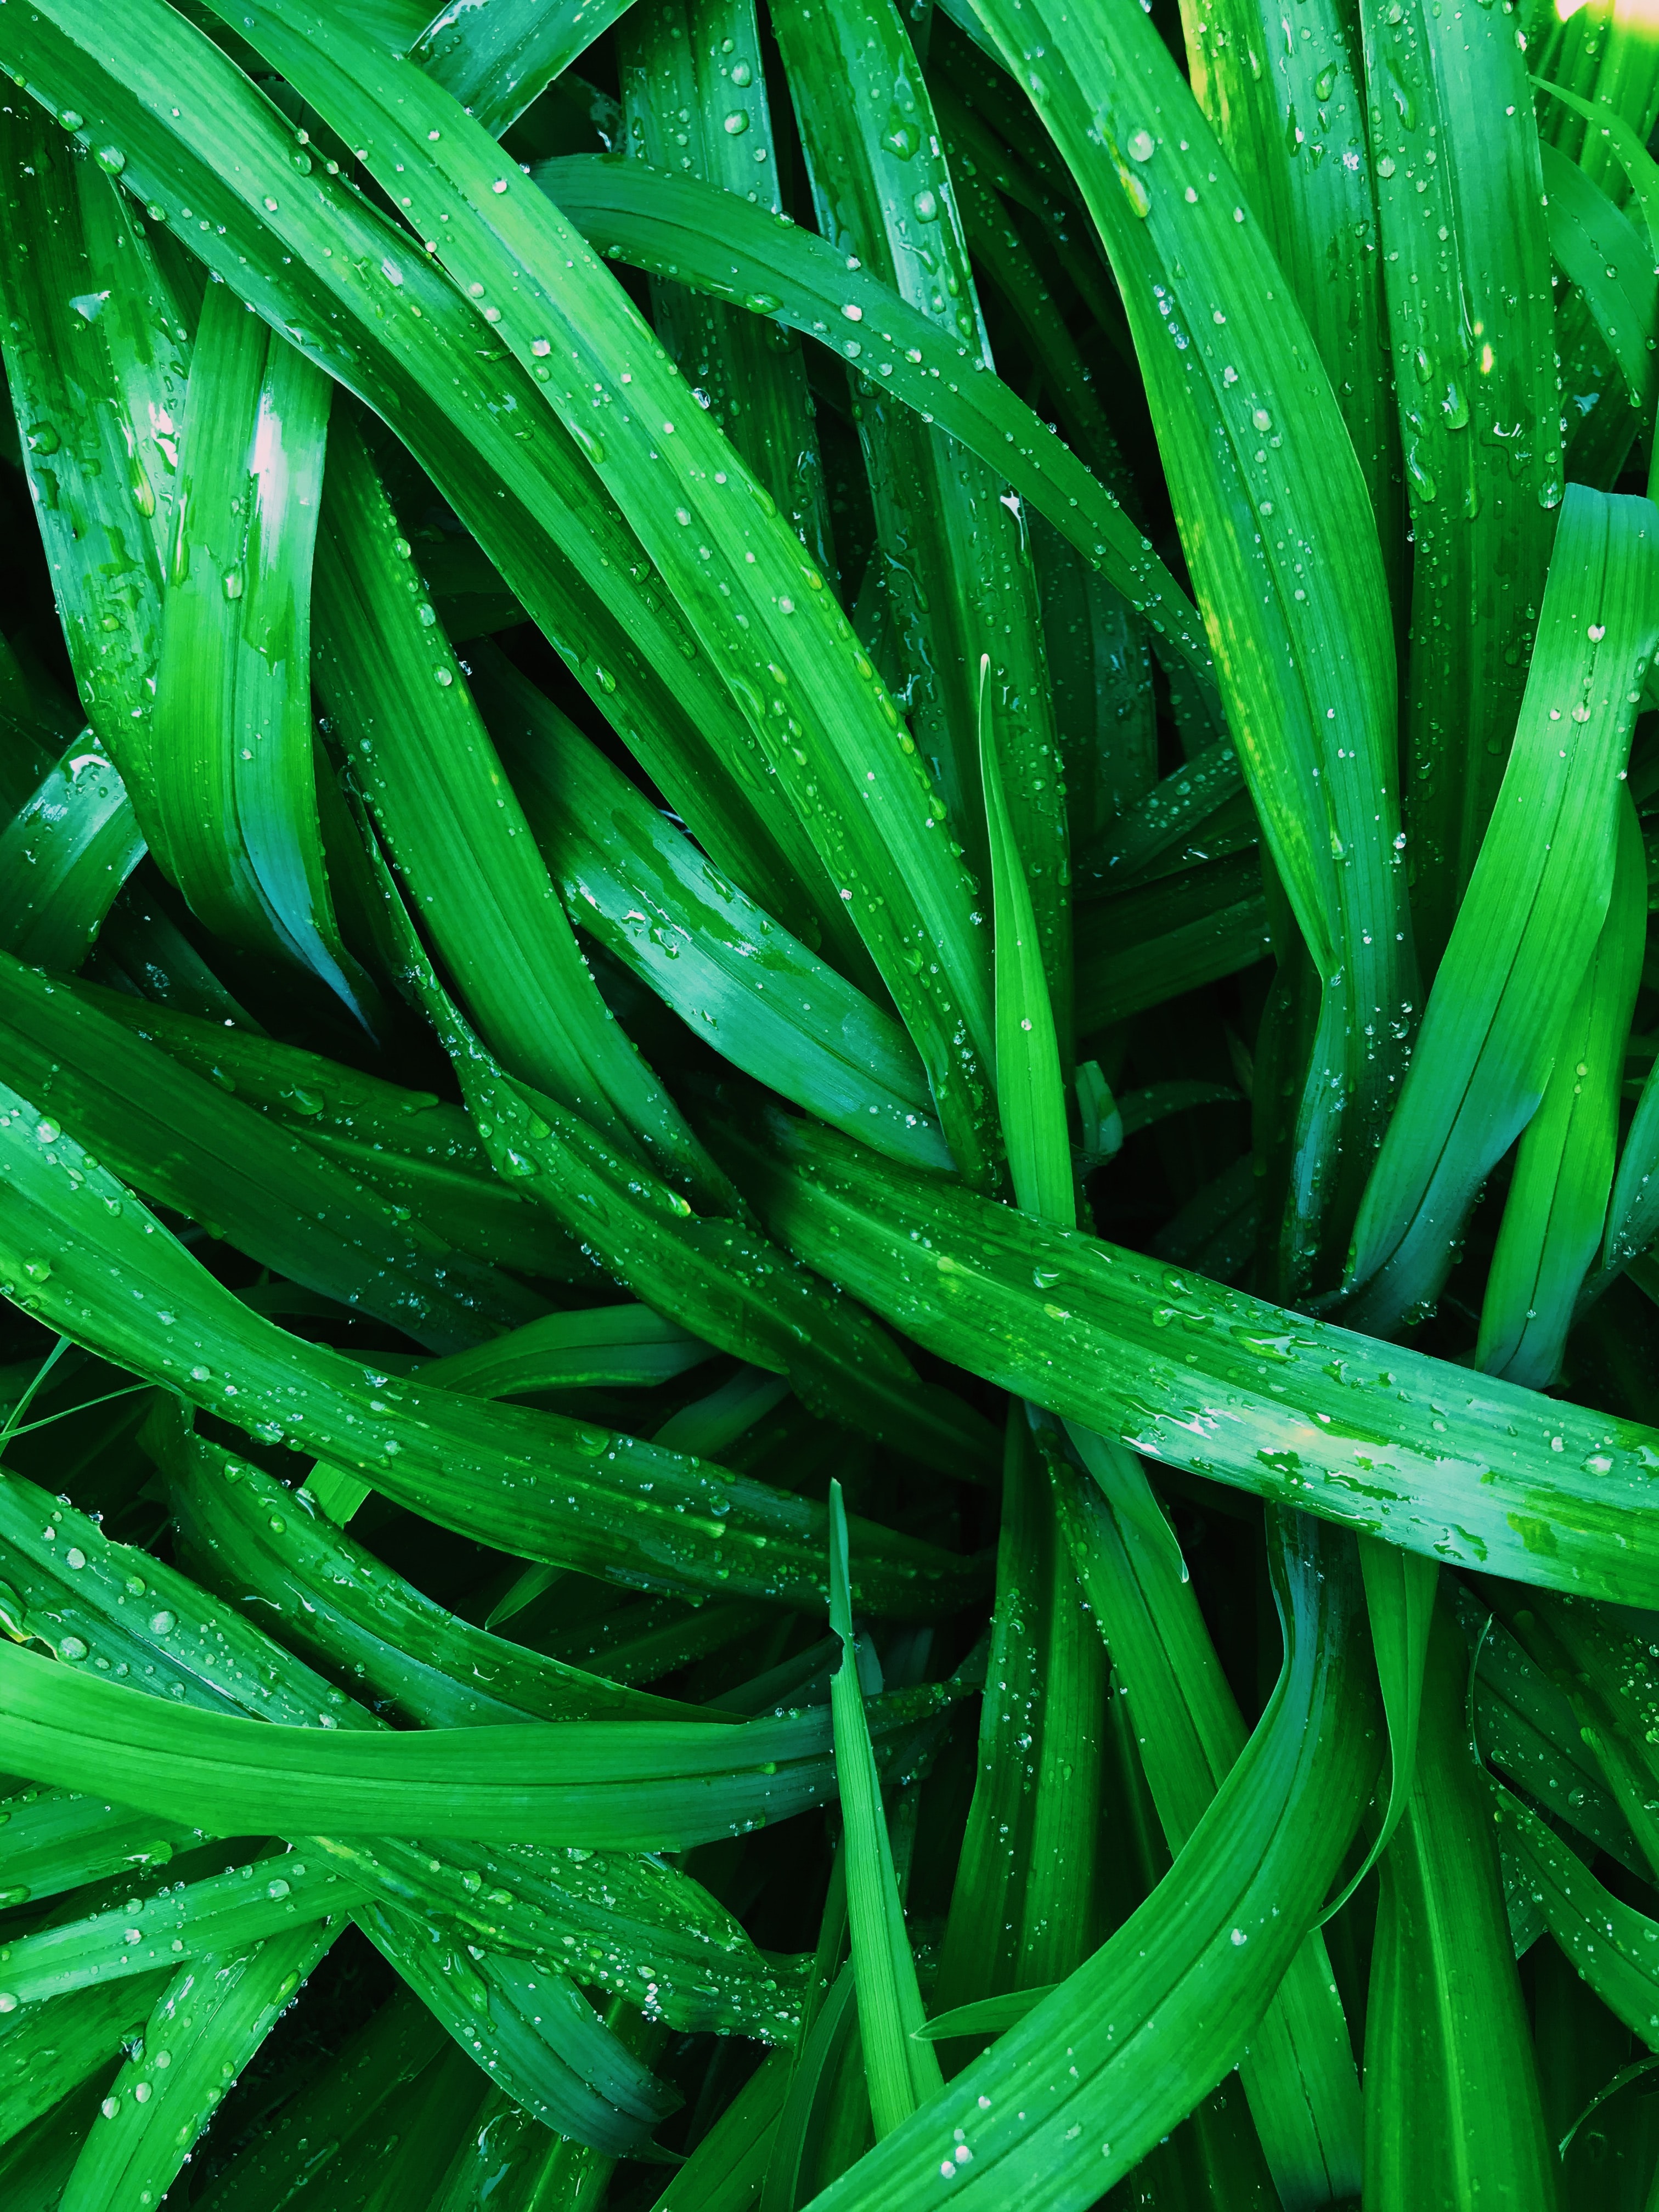 plants, nature, water, leaves, drops 1080p